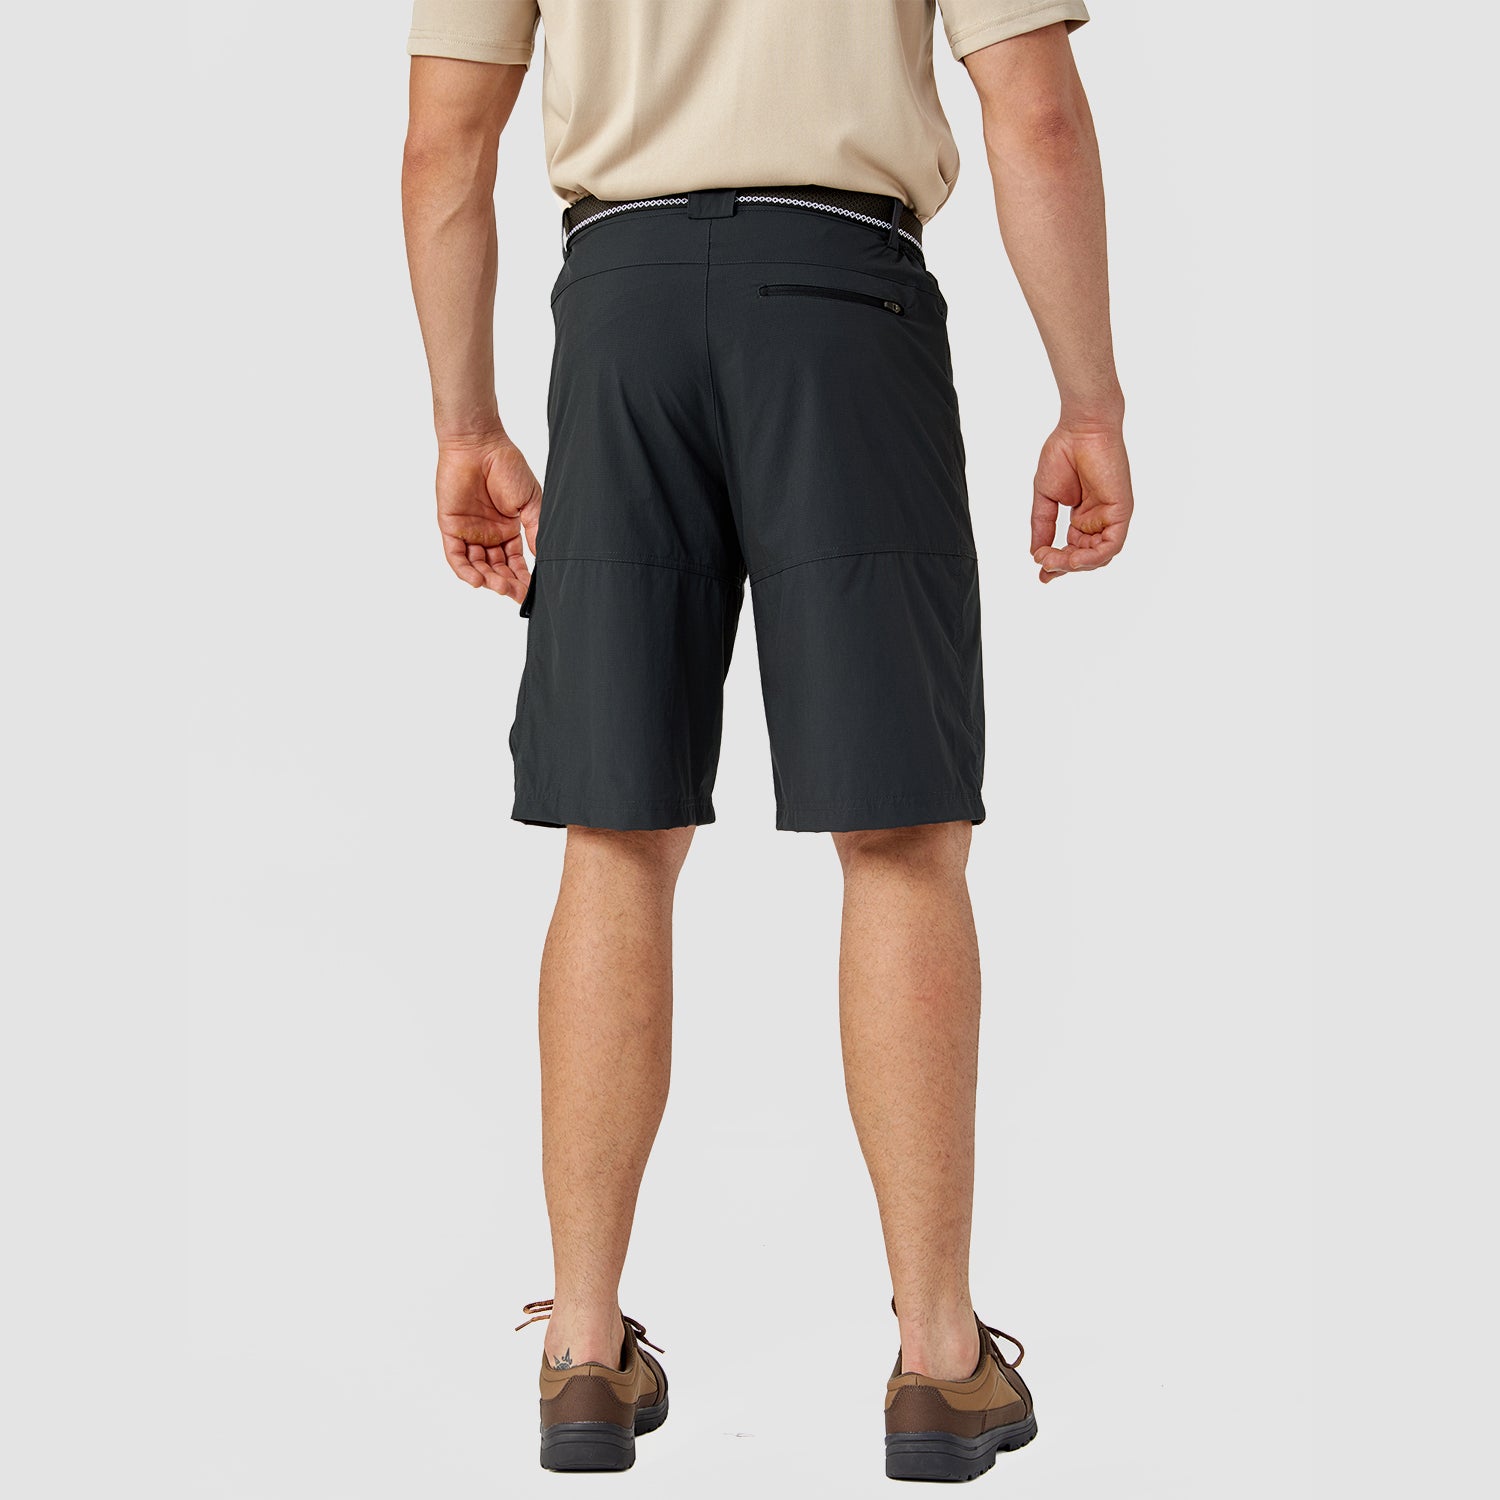 Men's Quick Dry Cargo Shorts Hiking Tactical with 5 Pockets